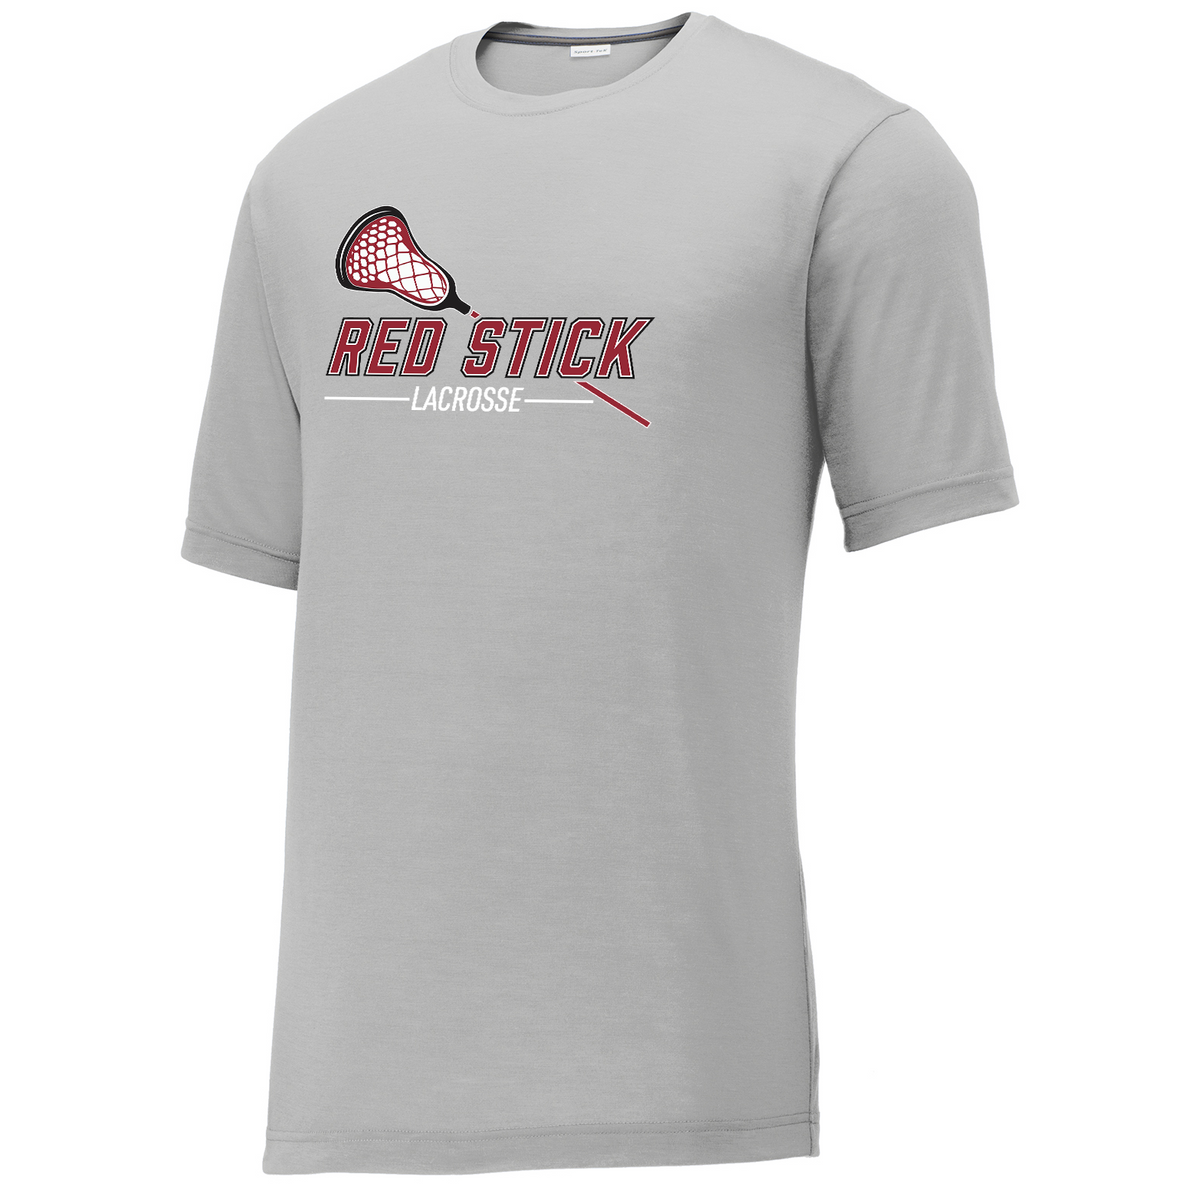 Red Stick Lacrosse CottonTouch Performance T-Shirt